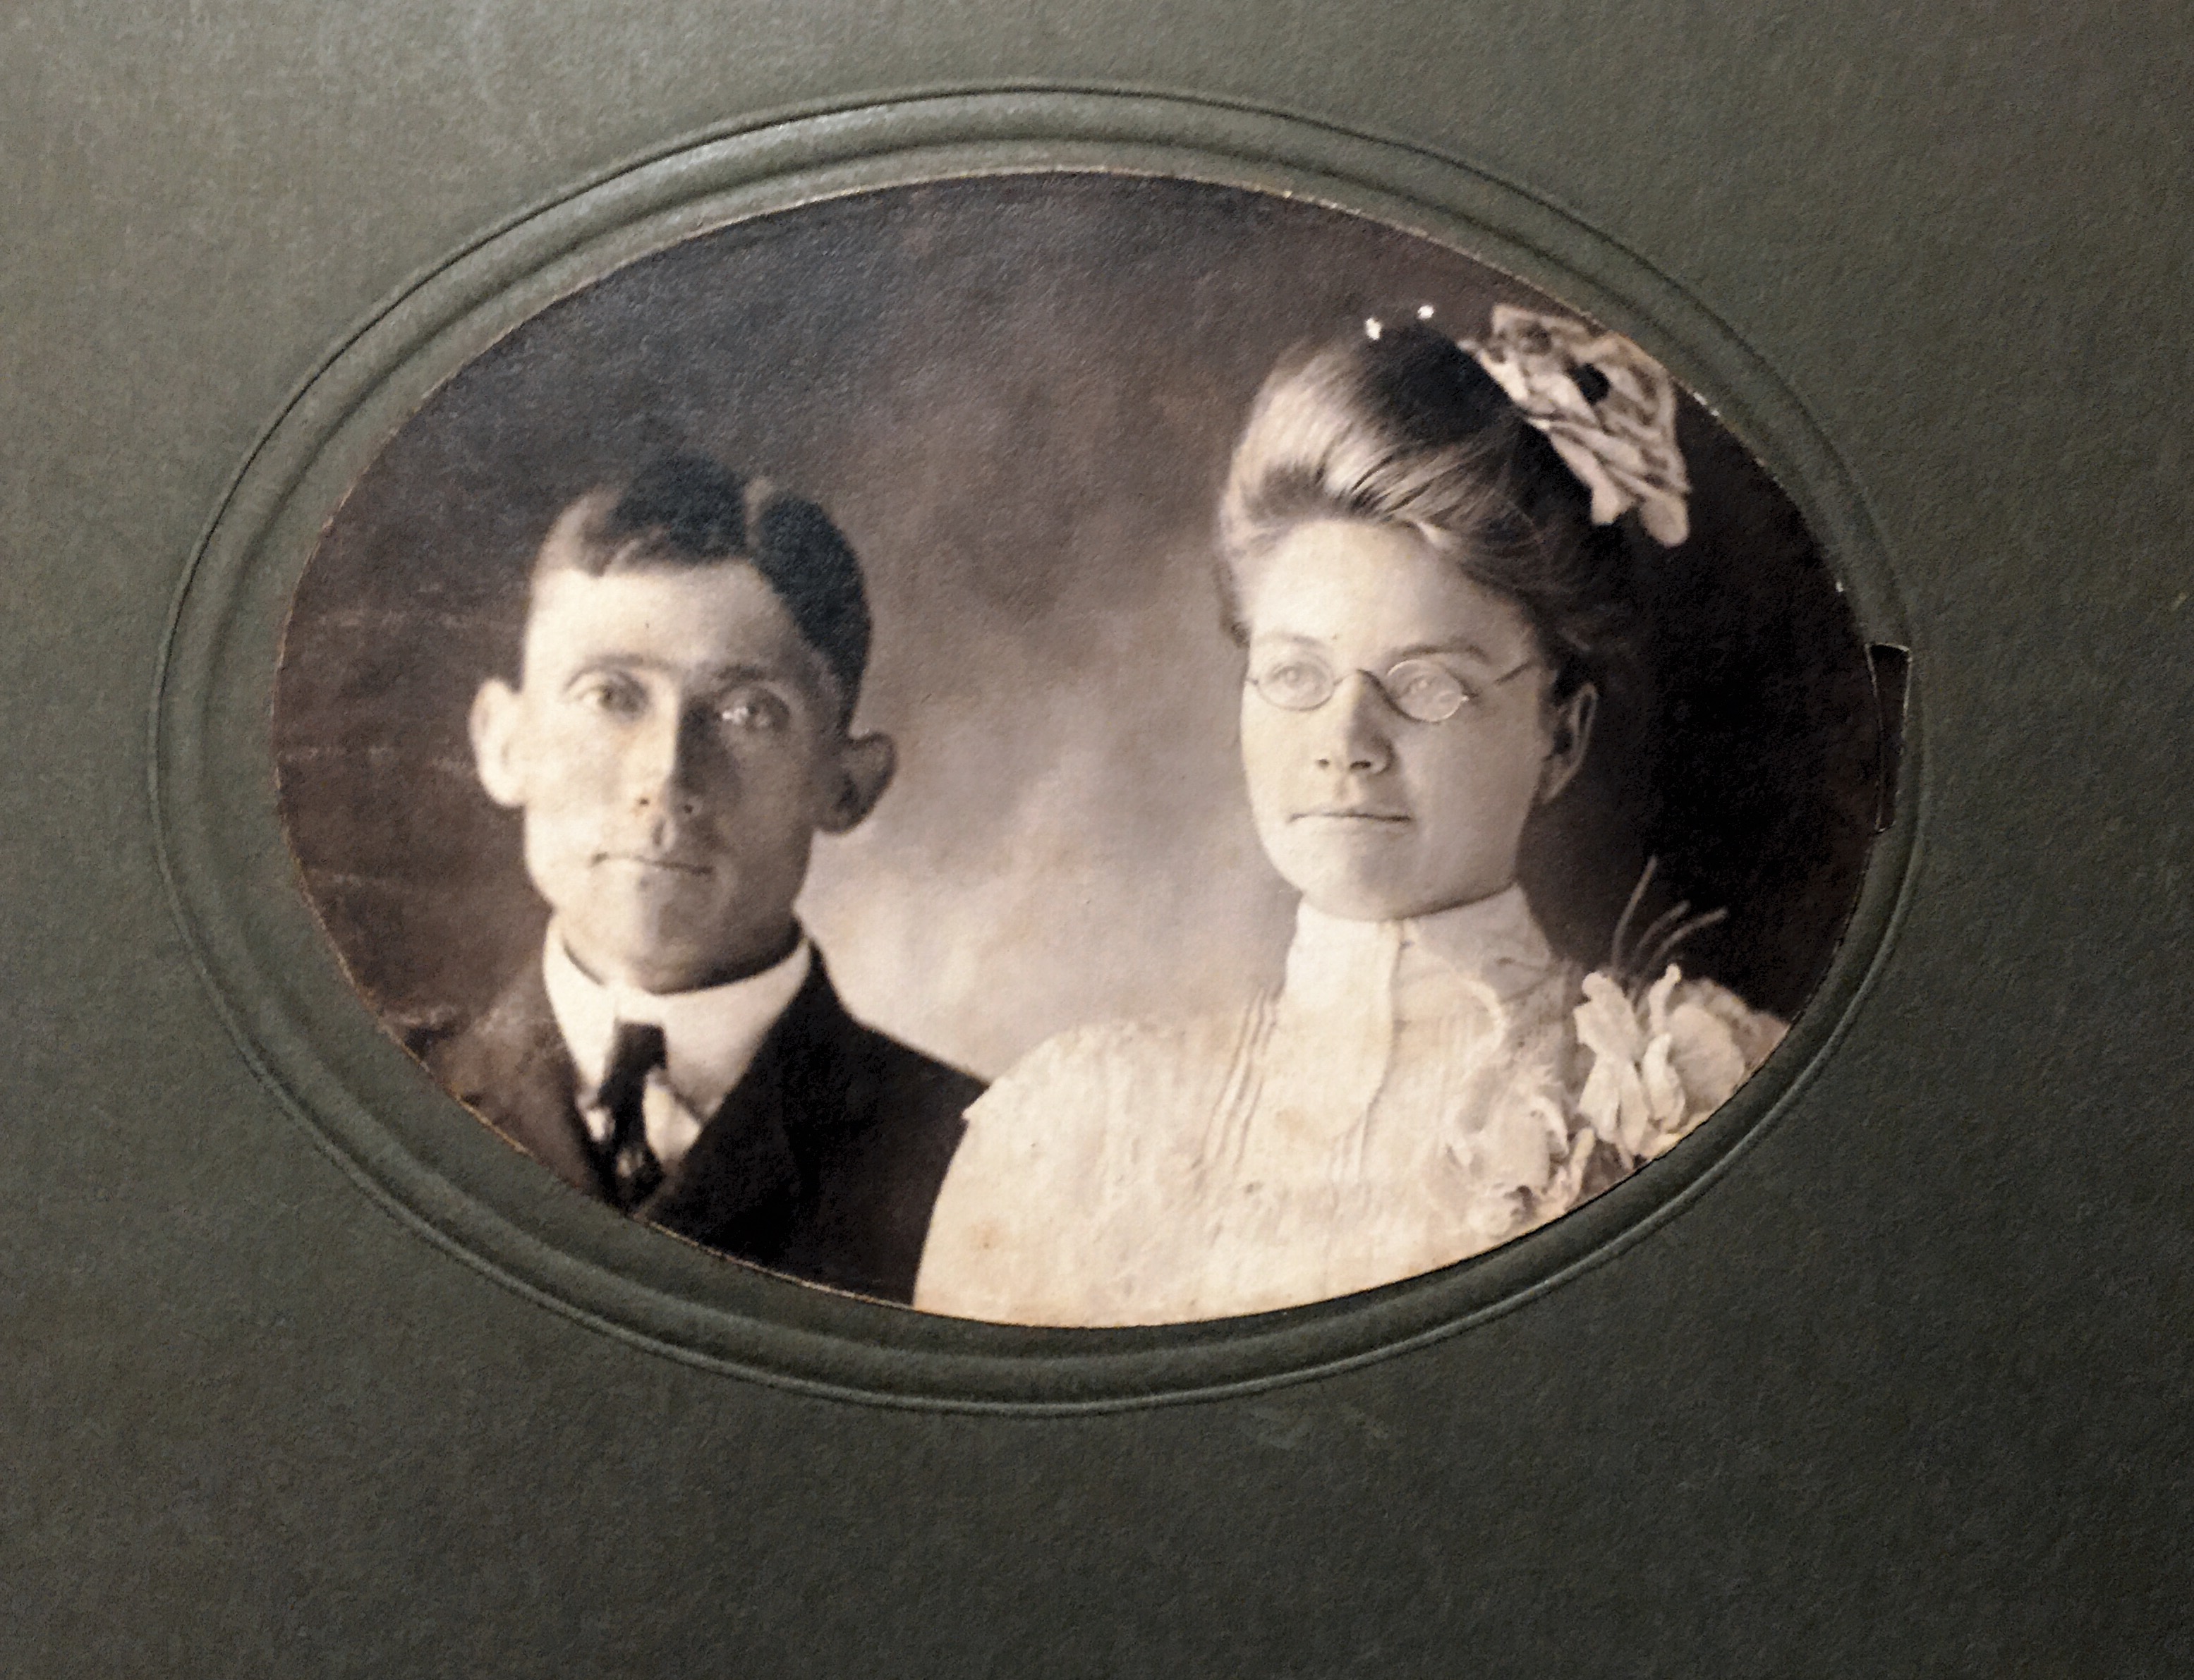 My Great Grandfather, John Wesley Wadkins and my Great Grandmother Laura Ruth Kemp on their wedding day in 1904.